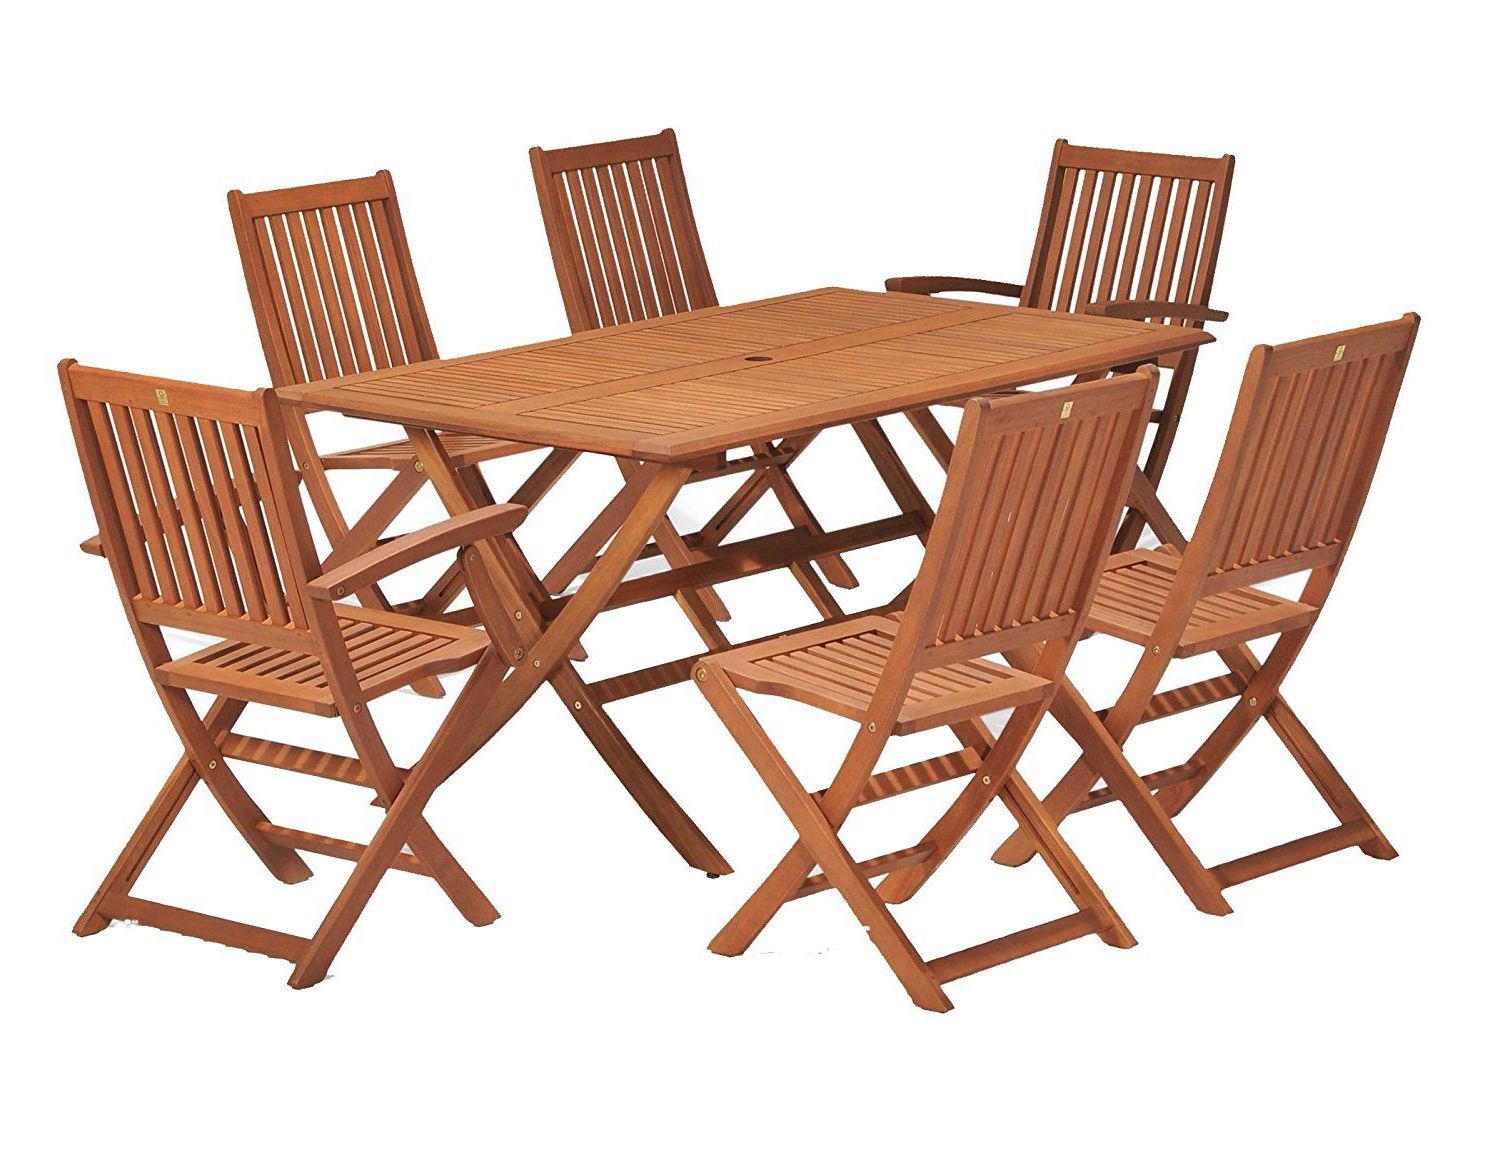 Rectangular Teak And Eucalyptus Patio Dining Sets Inside Widely Used Wiltshire Fsc Eucalyptus Wood 6 Seater Outdoor Dining Set, With (View 2 of 15)